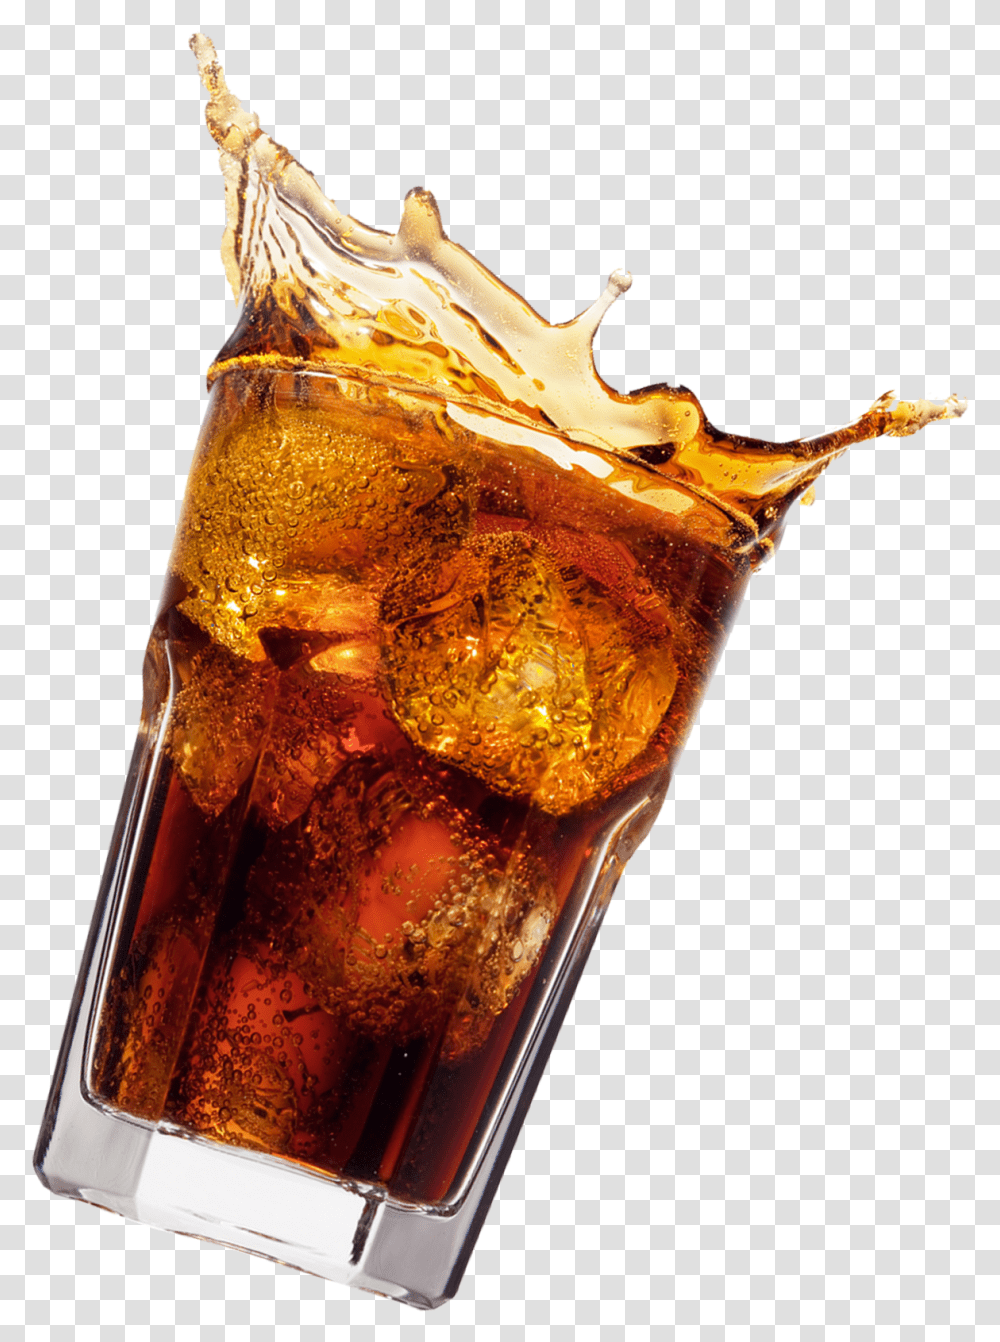 Hd Coca Cola Glass Image Free Download Coca Cola Glass, Cocktail, Alcohol, Beverage, Drink Transparent Png